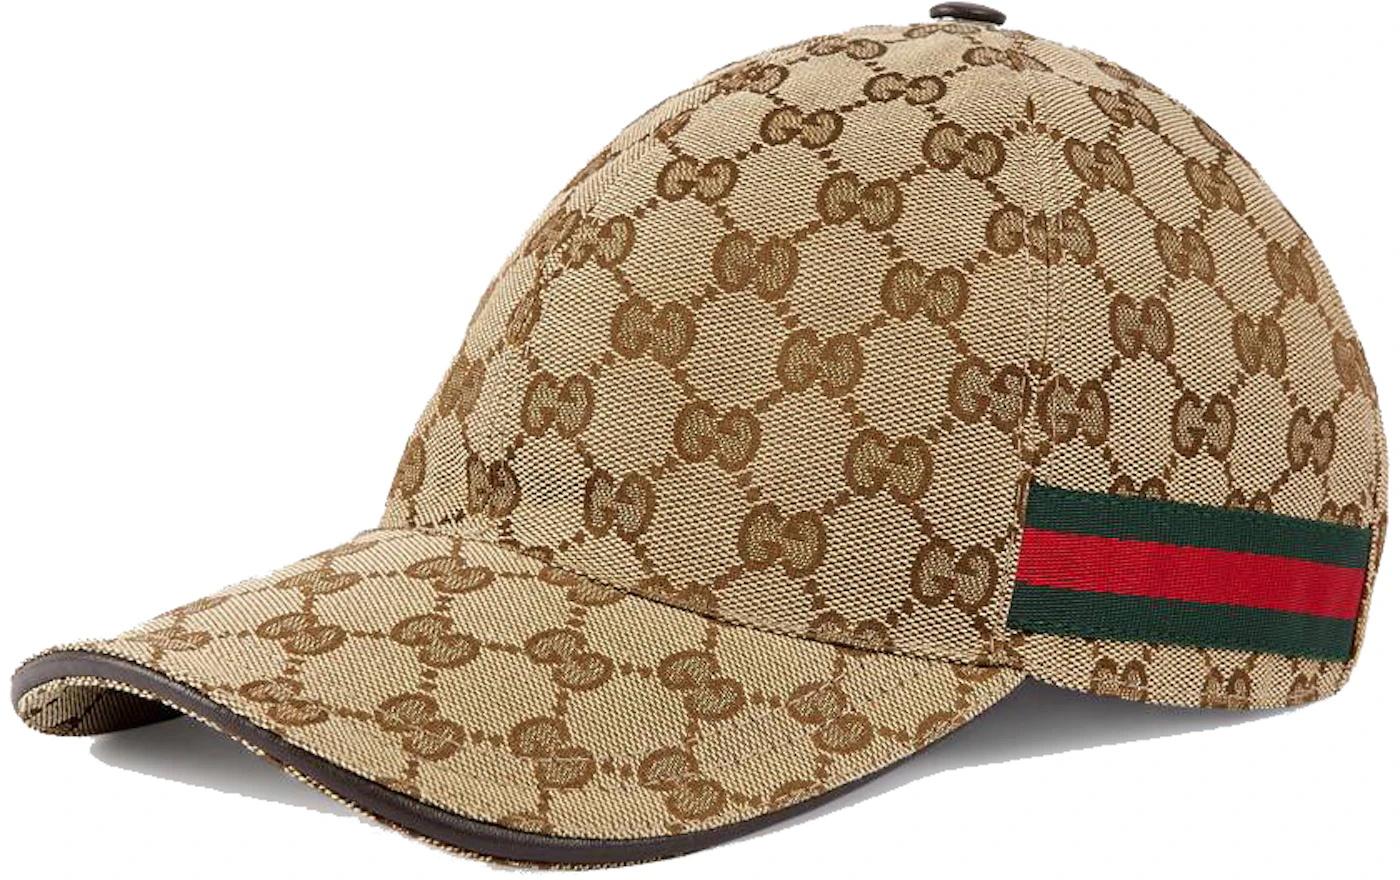 Gucci Not Fake Baseball Cap w/ Tags - Brown Hats, Accessories